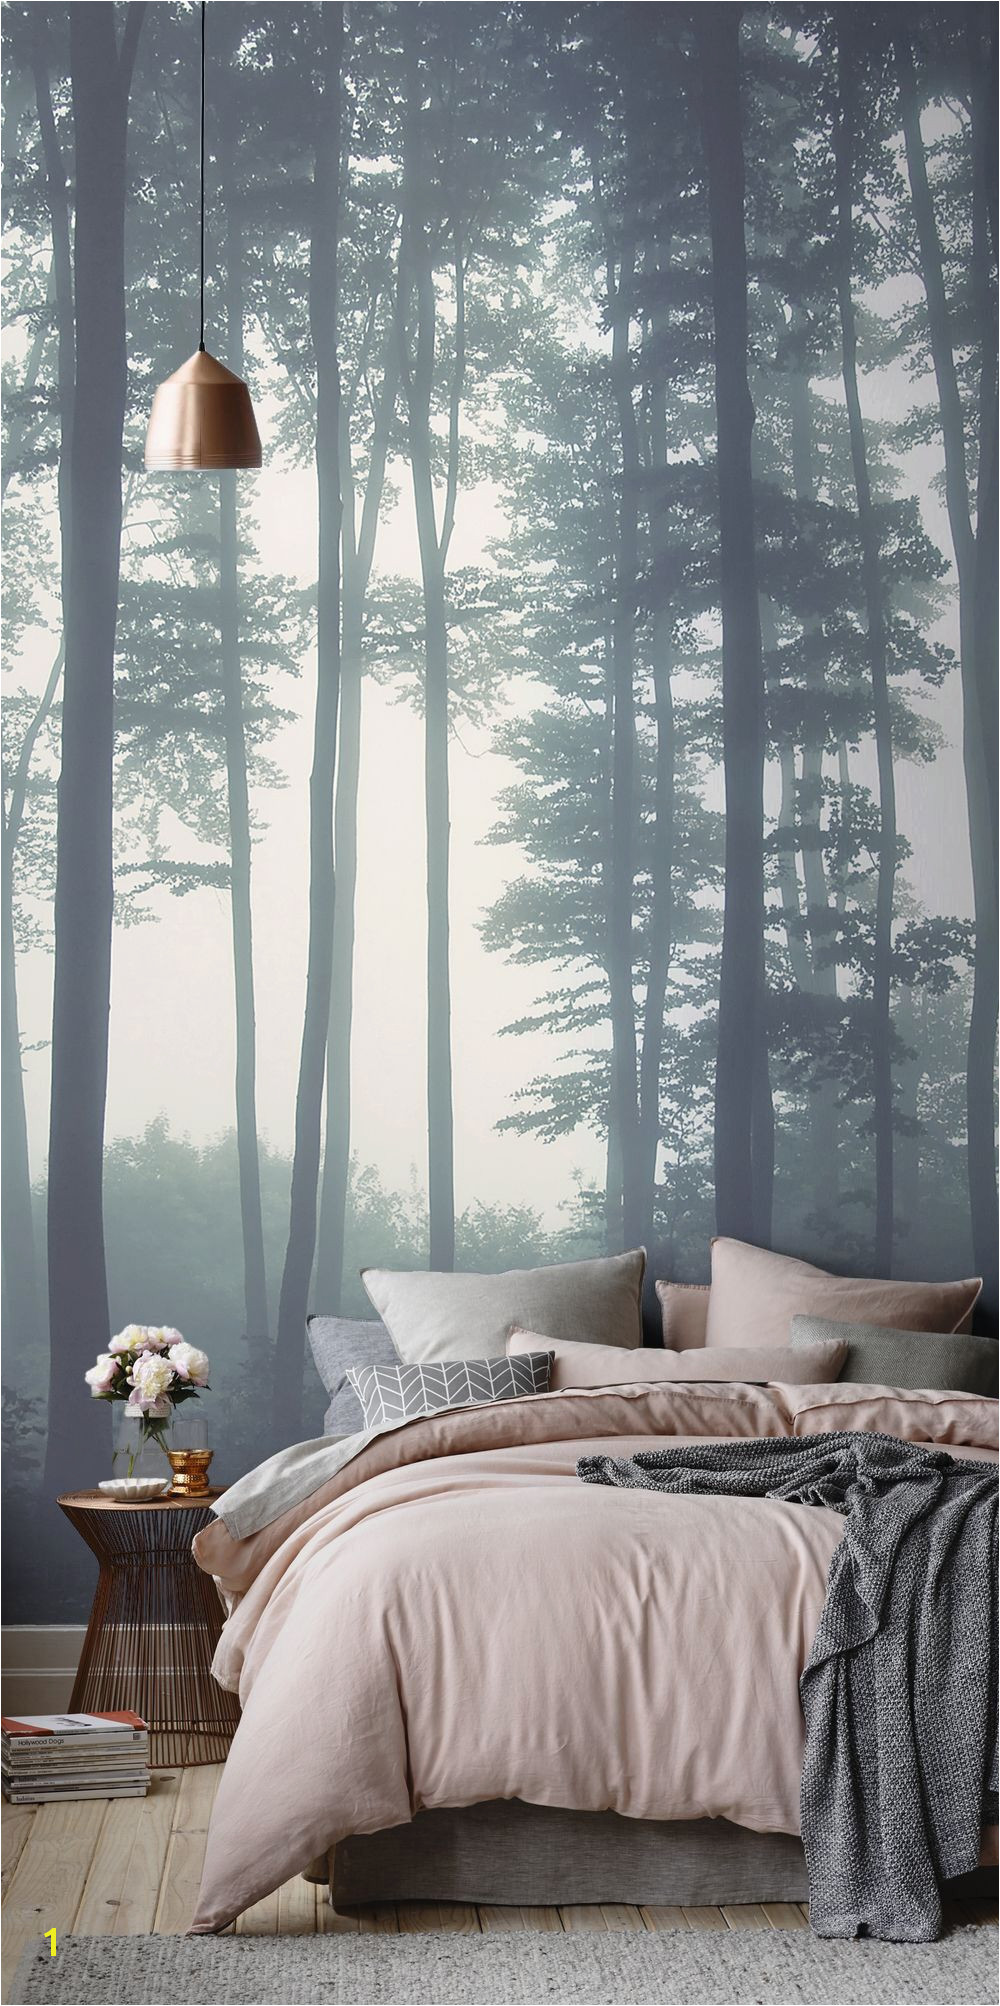 Glow In the Dark Wall Murals Uk Sea Of Trees forest Mural Wallpaper